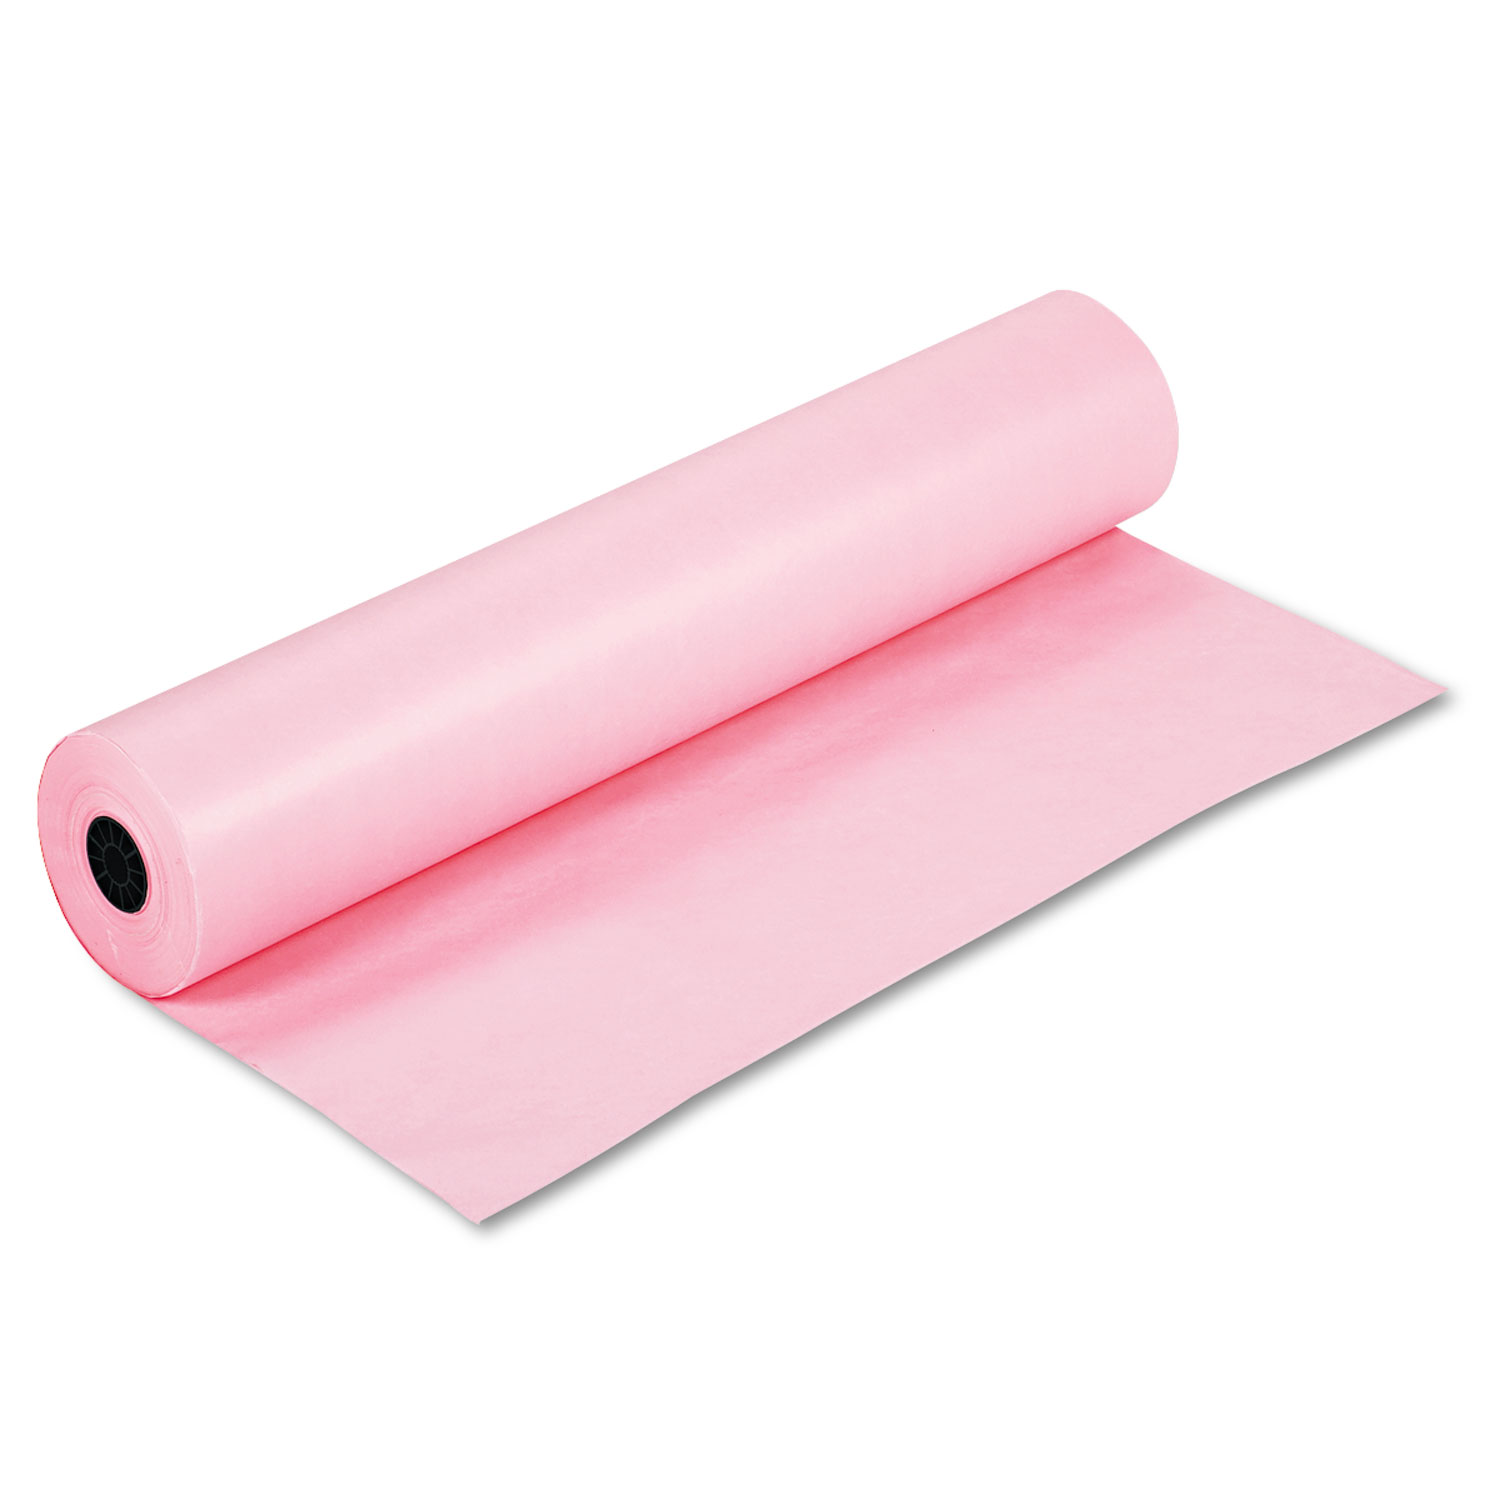 Rainbow Duo-Finish Colored Kraft Paper, 35 lbs., 36 x 1000 ft, Pink